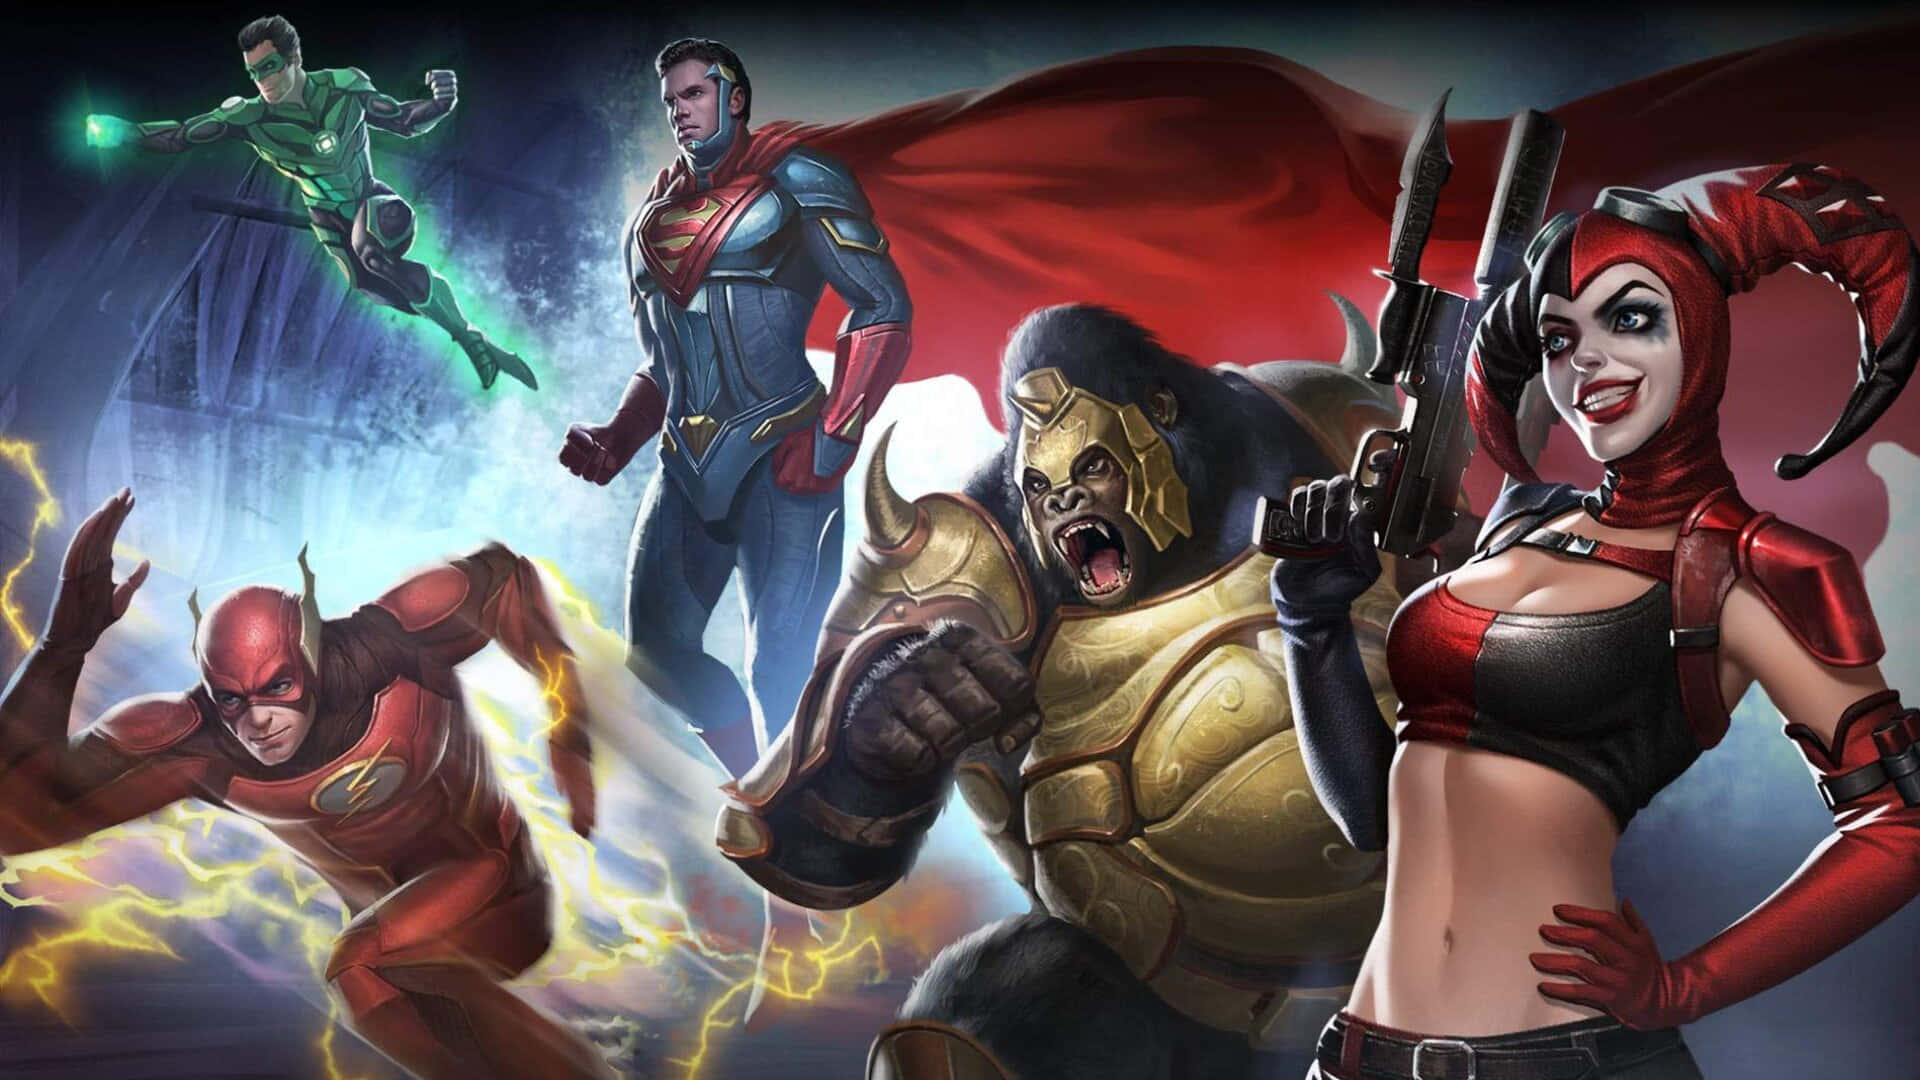 Superheroes Unite in an Epic Video Game Battle Wallpaper